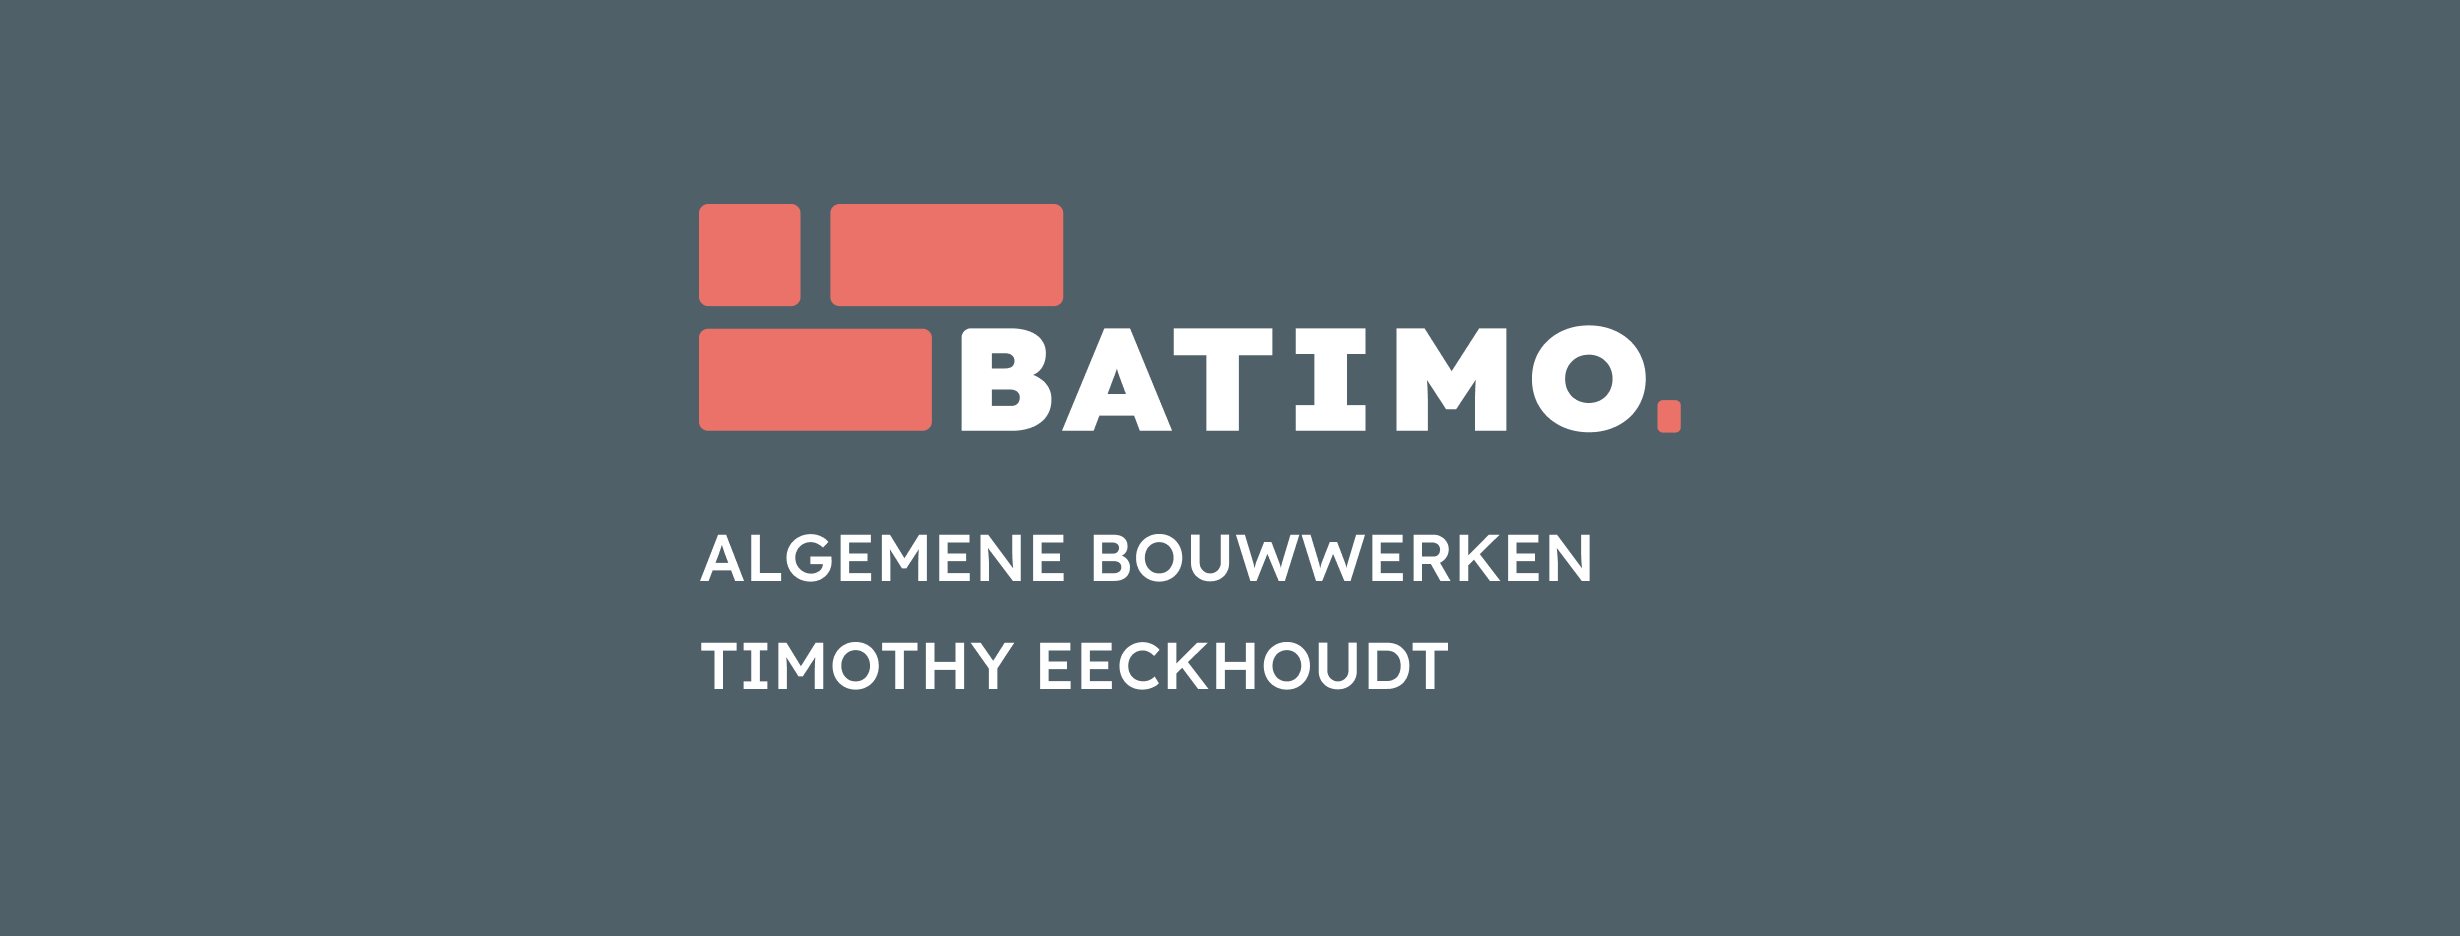 voegers Melle Batimo